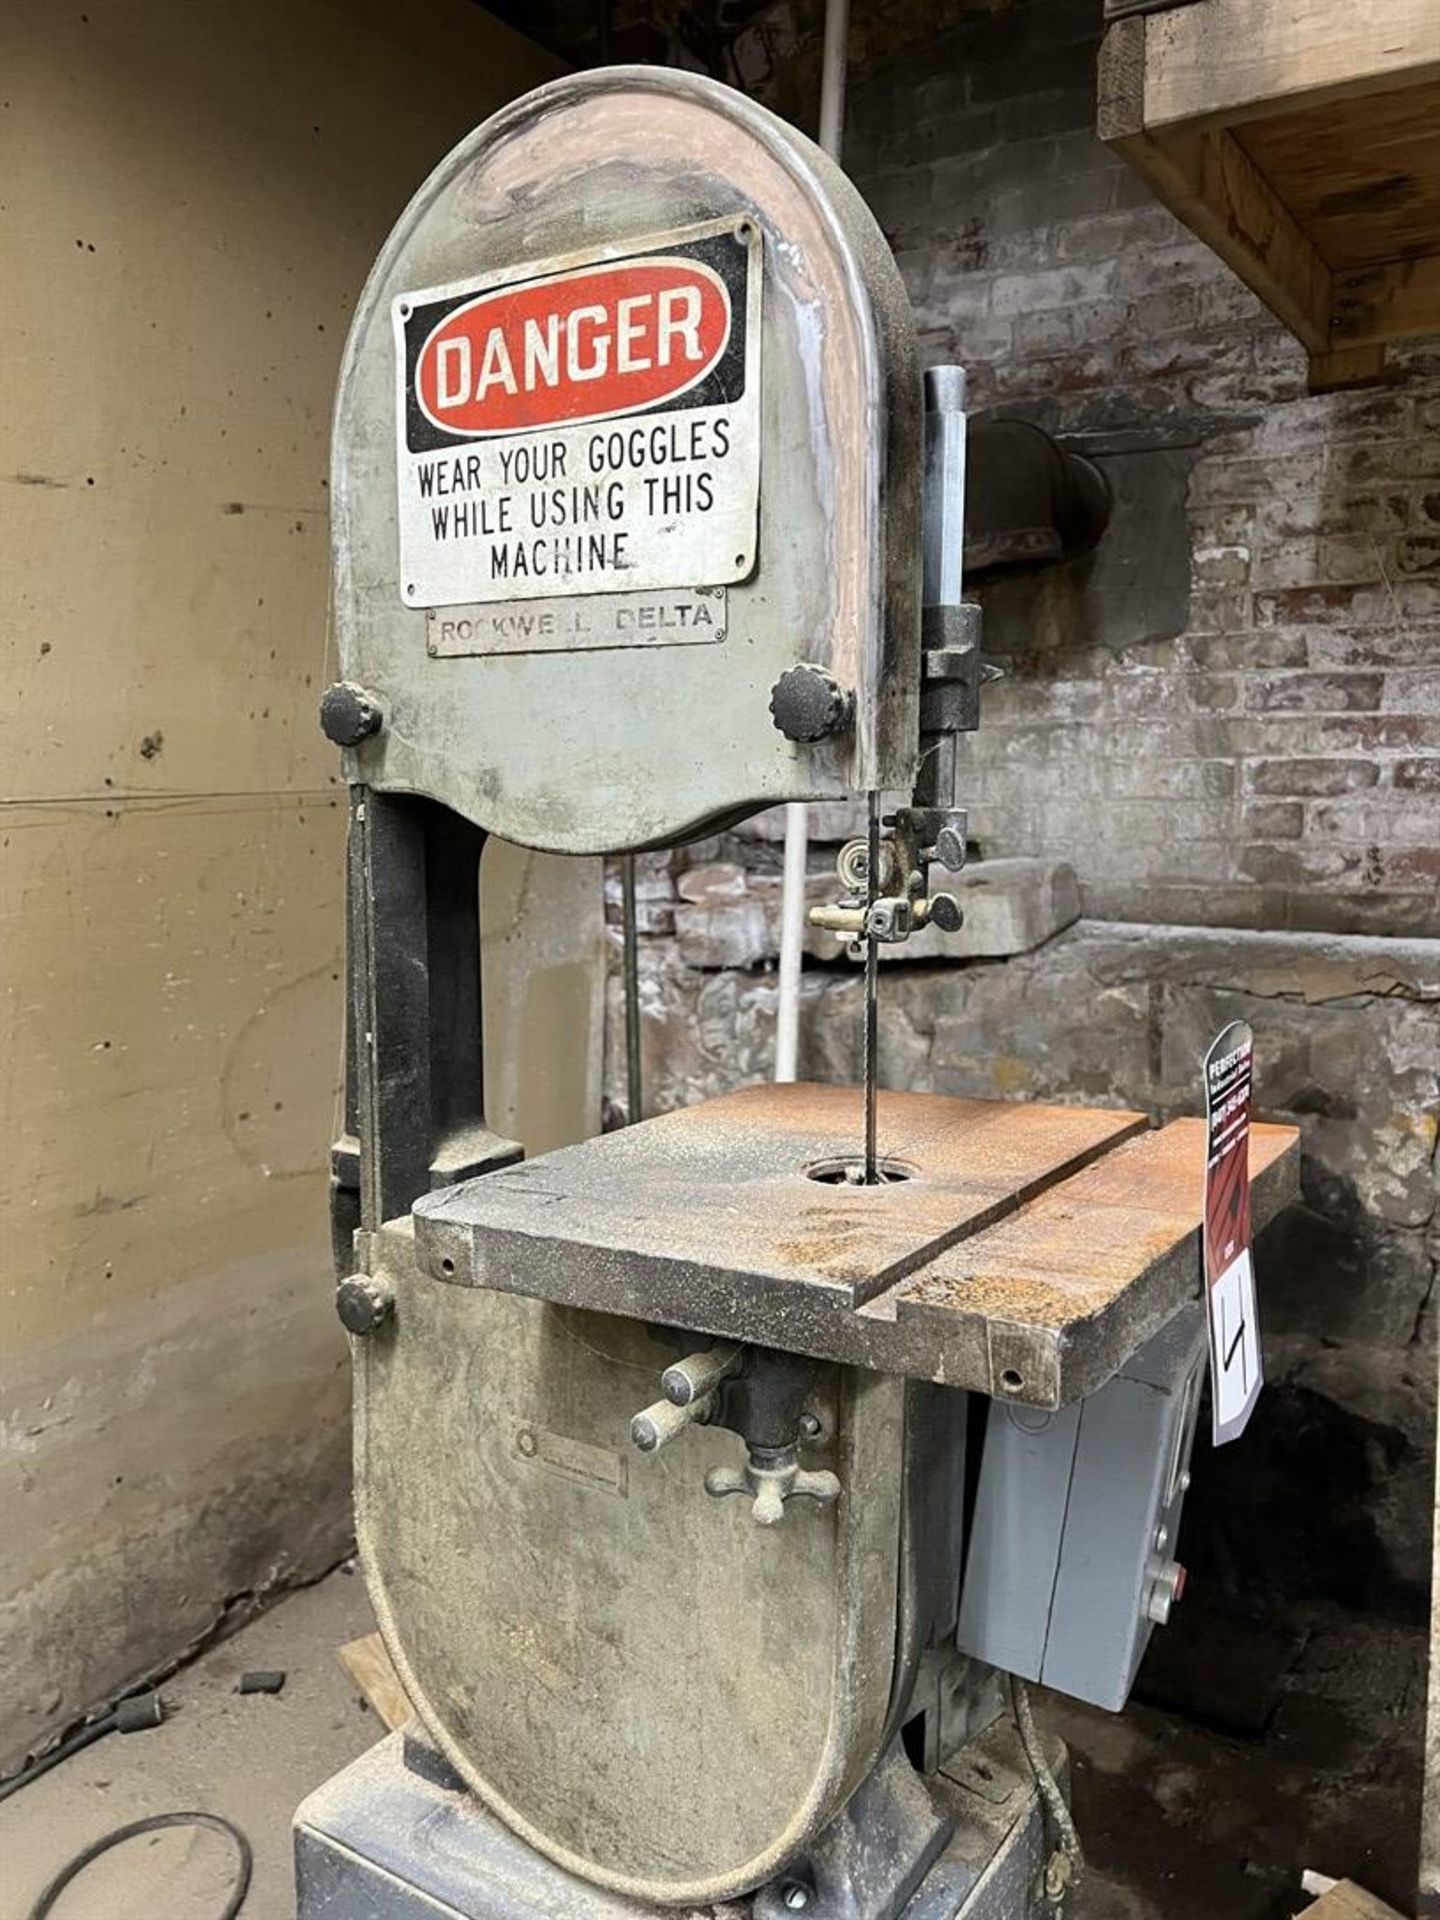 ROCKWELL DELTA 14" Vertical Bandsaw, 14" x 14" Table, 14" Throat - Image 3 of 3